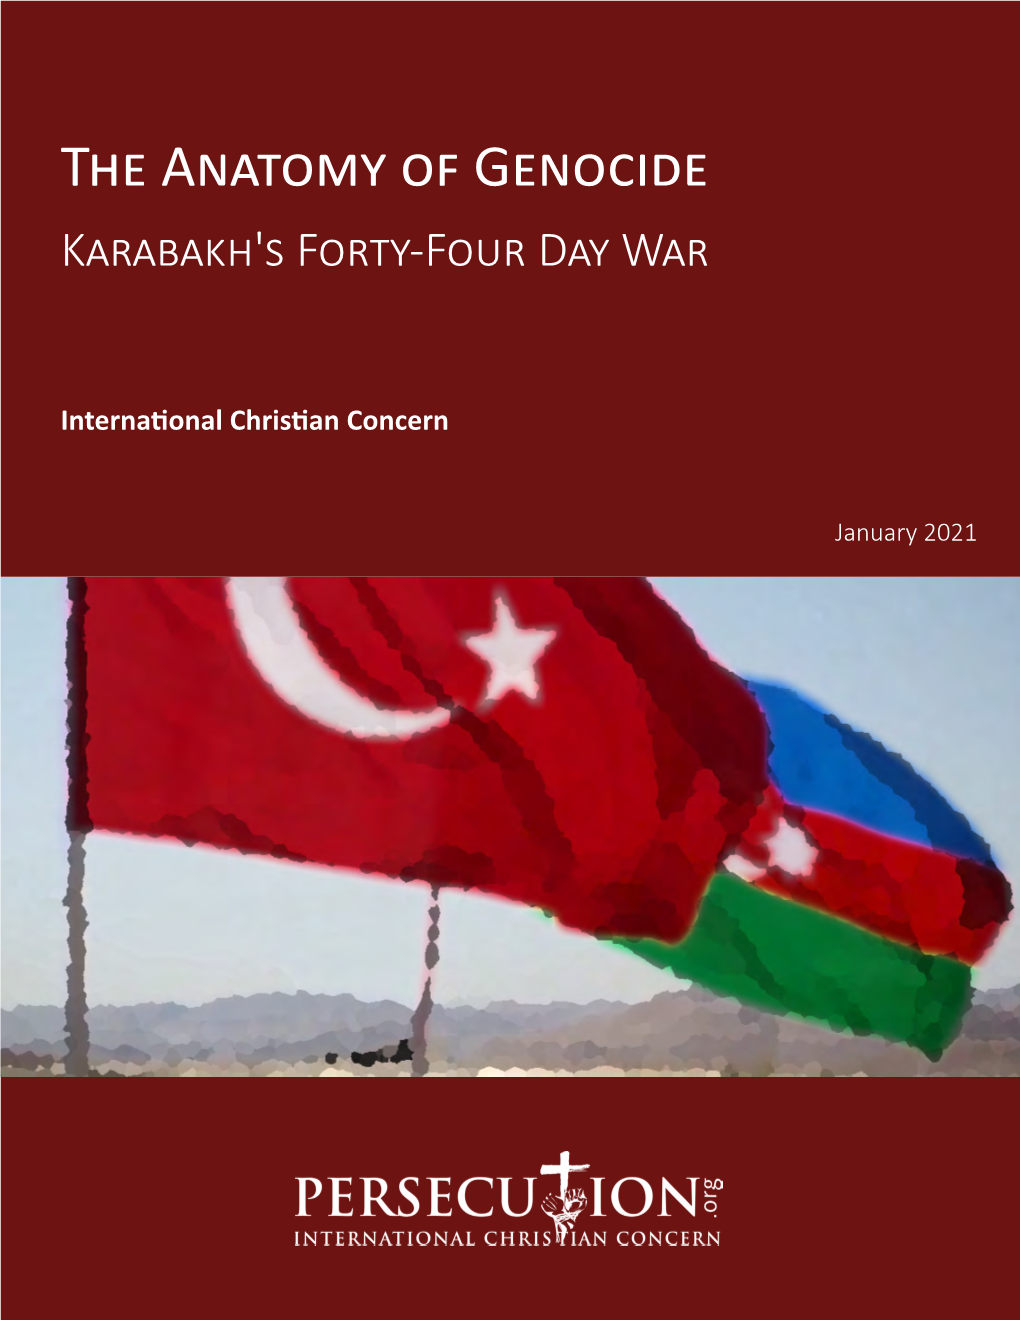 The Anatomy of Genocide: Karabakh's Forty-Four Day War